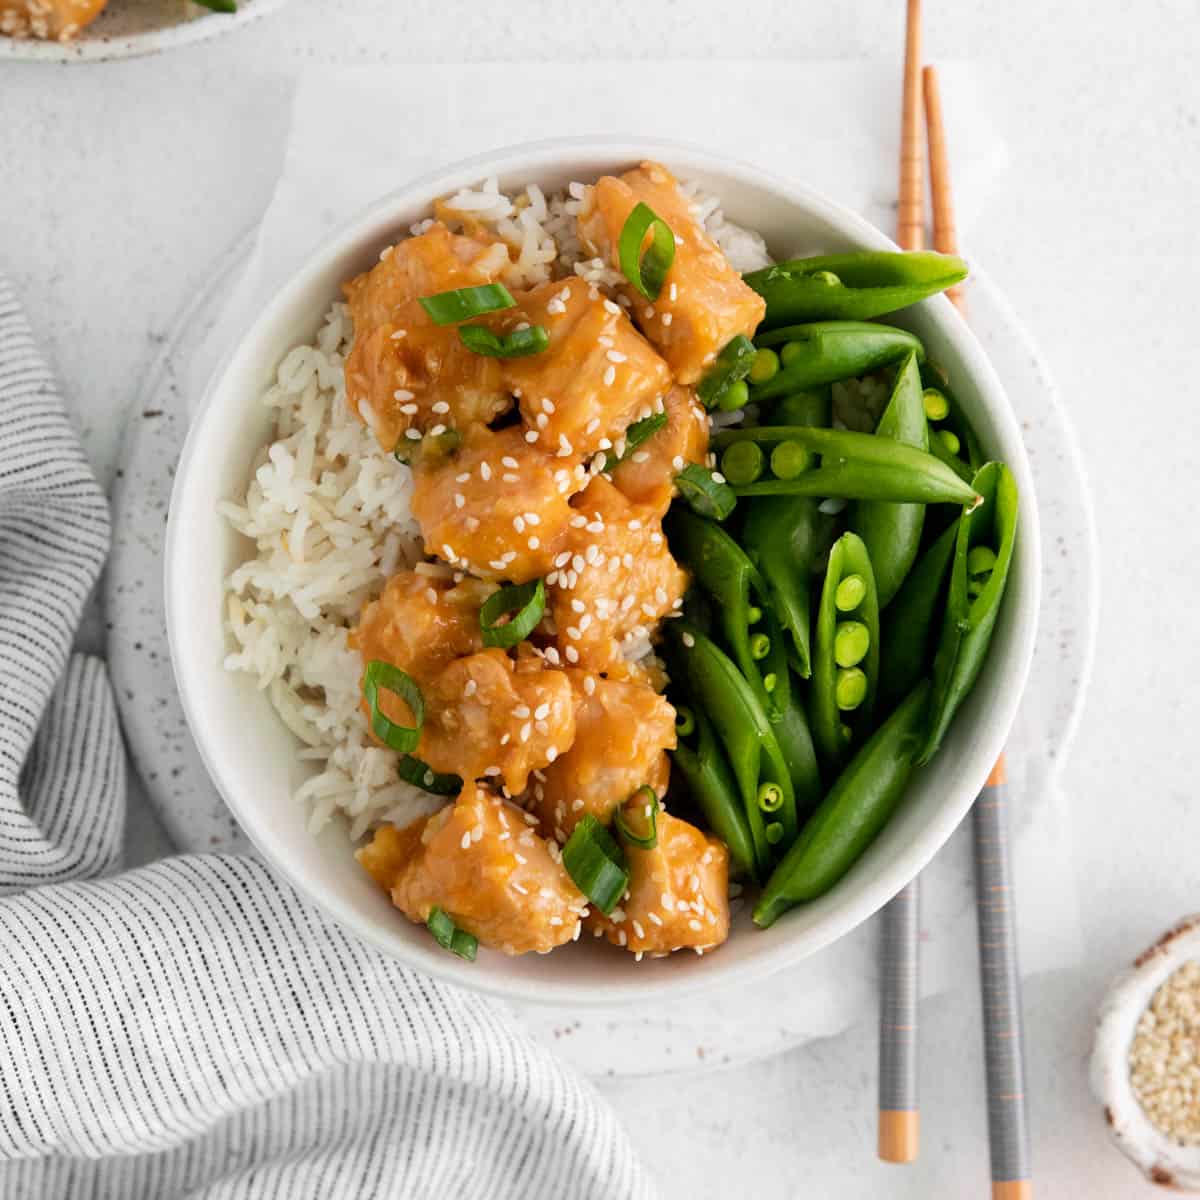 Pieces of orange chicken with sesame seeds and green onions on top in a bowl with rice and veggies..